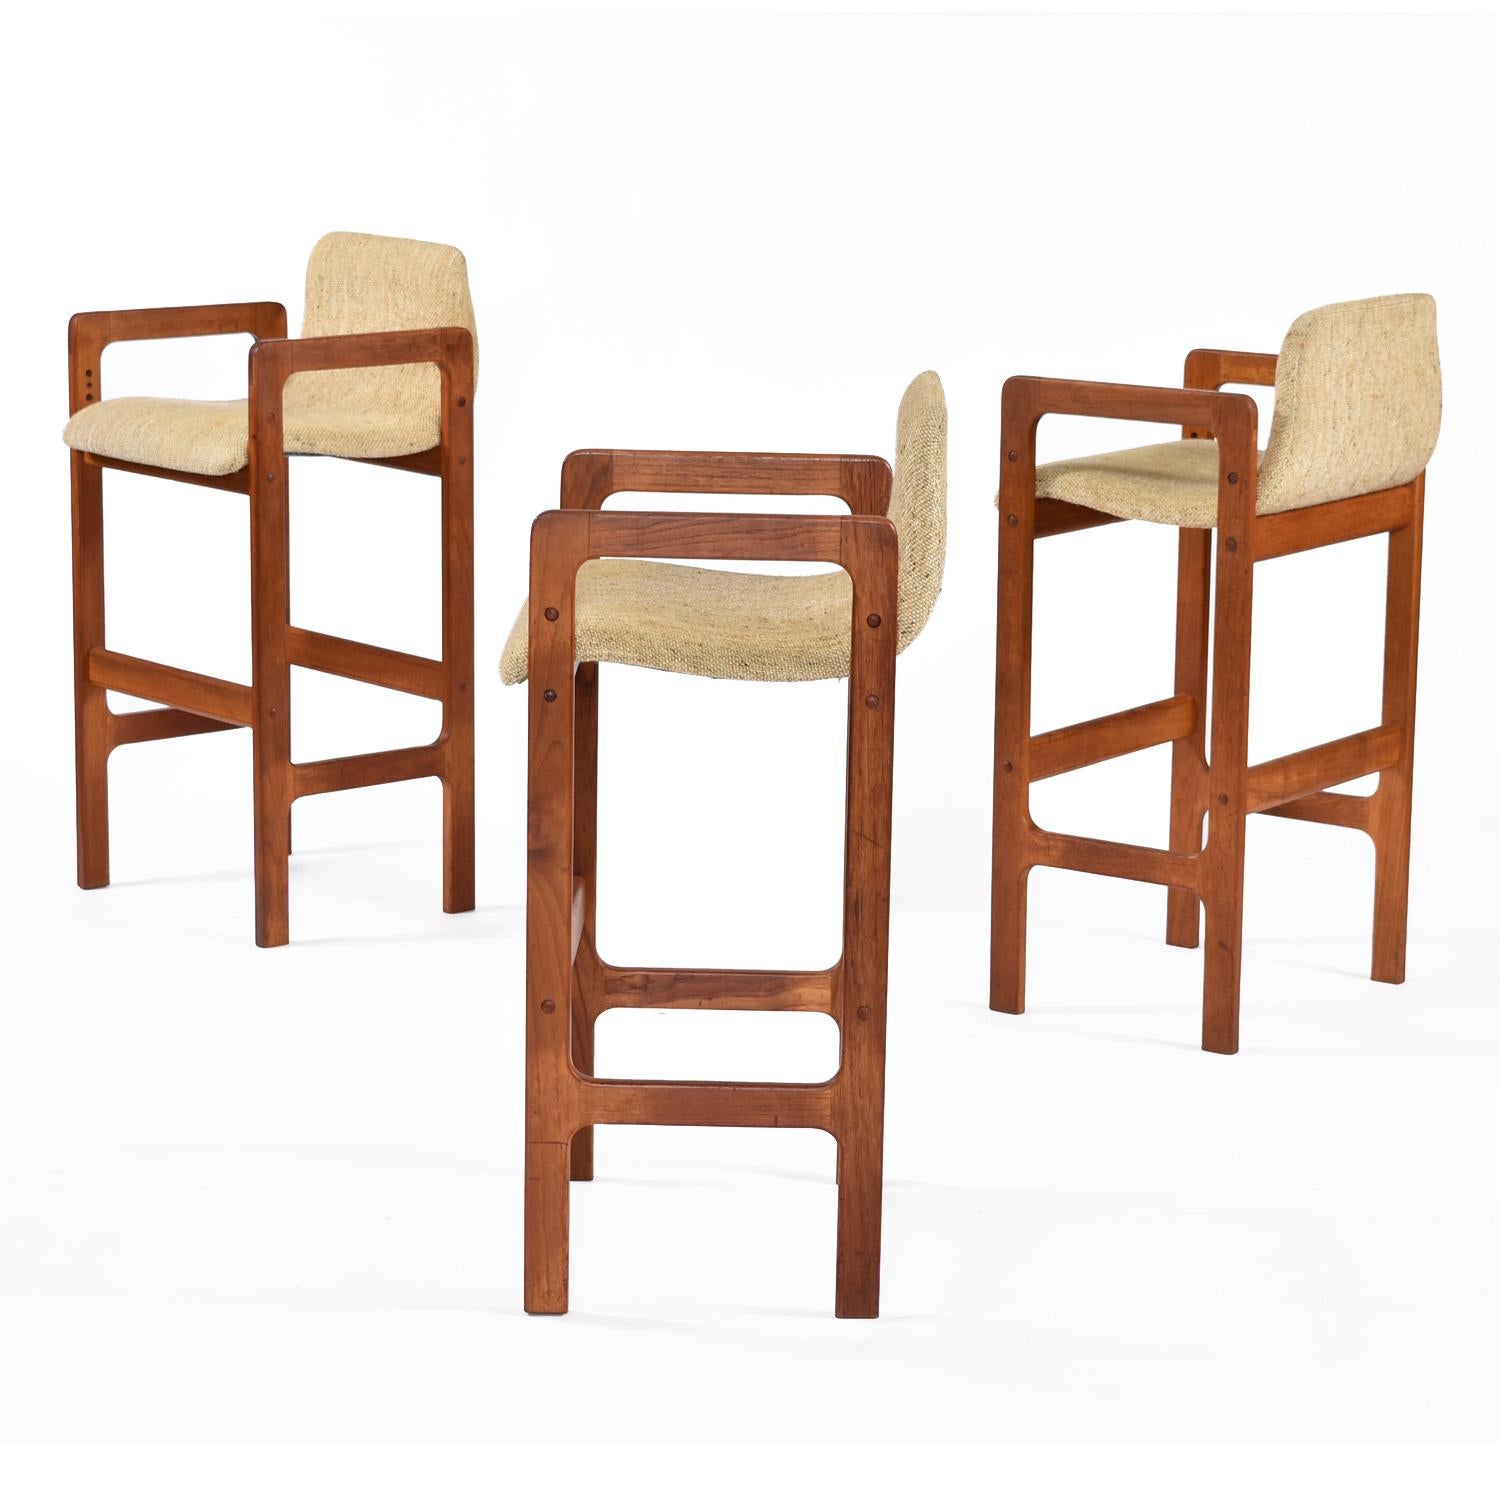 These classic and comfortable teak bars tools by D-Scan resemble Erik Buch’s popular design.   Scandinavian modern simplicity and practicality.  Solid teak architectural frames support the low-back, curved, S-shape seats.  The seats are upholstered